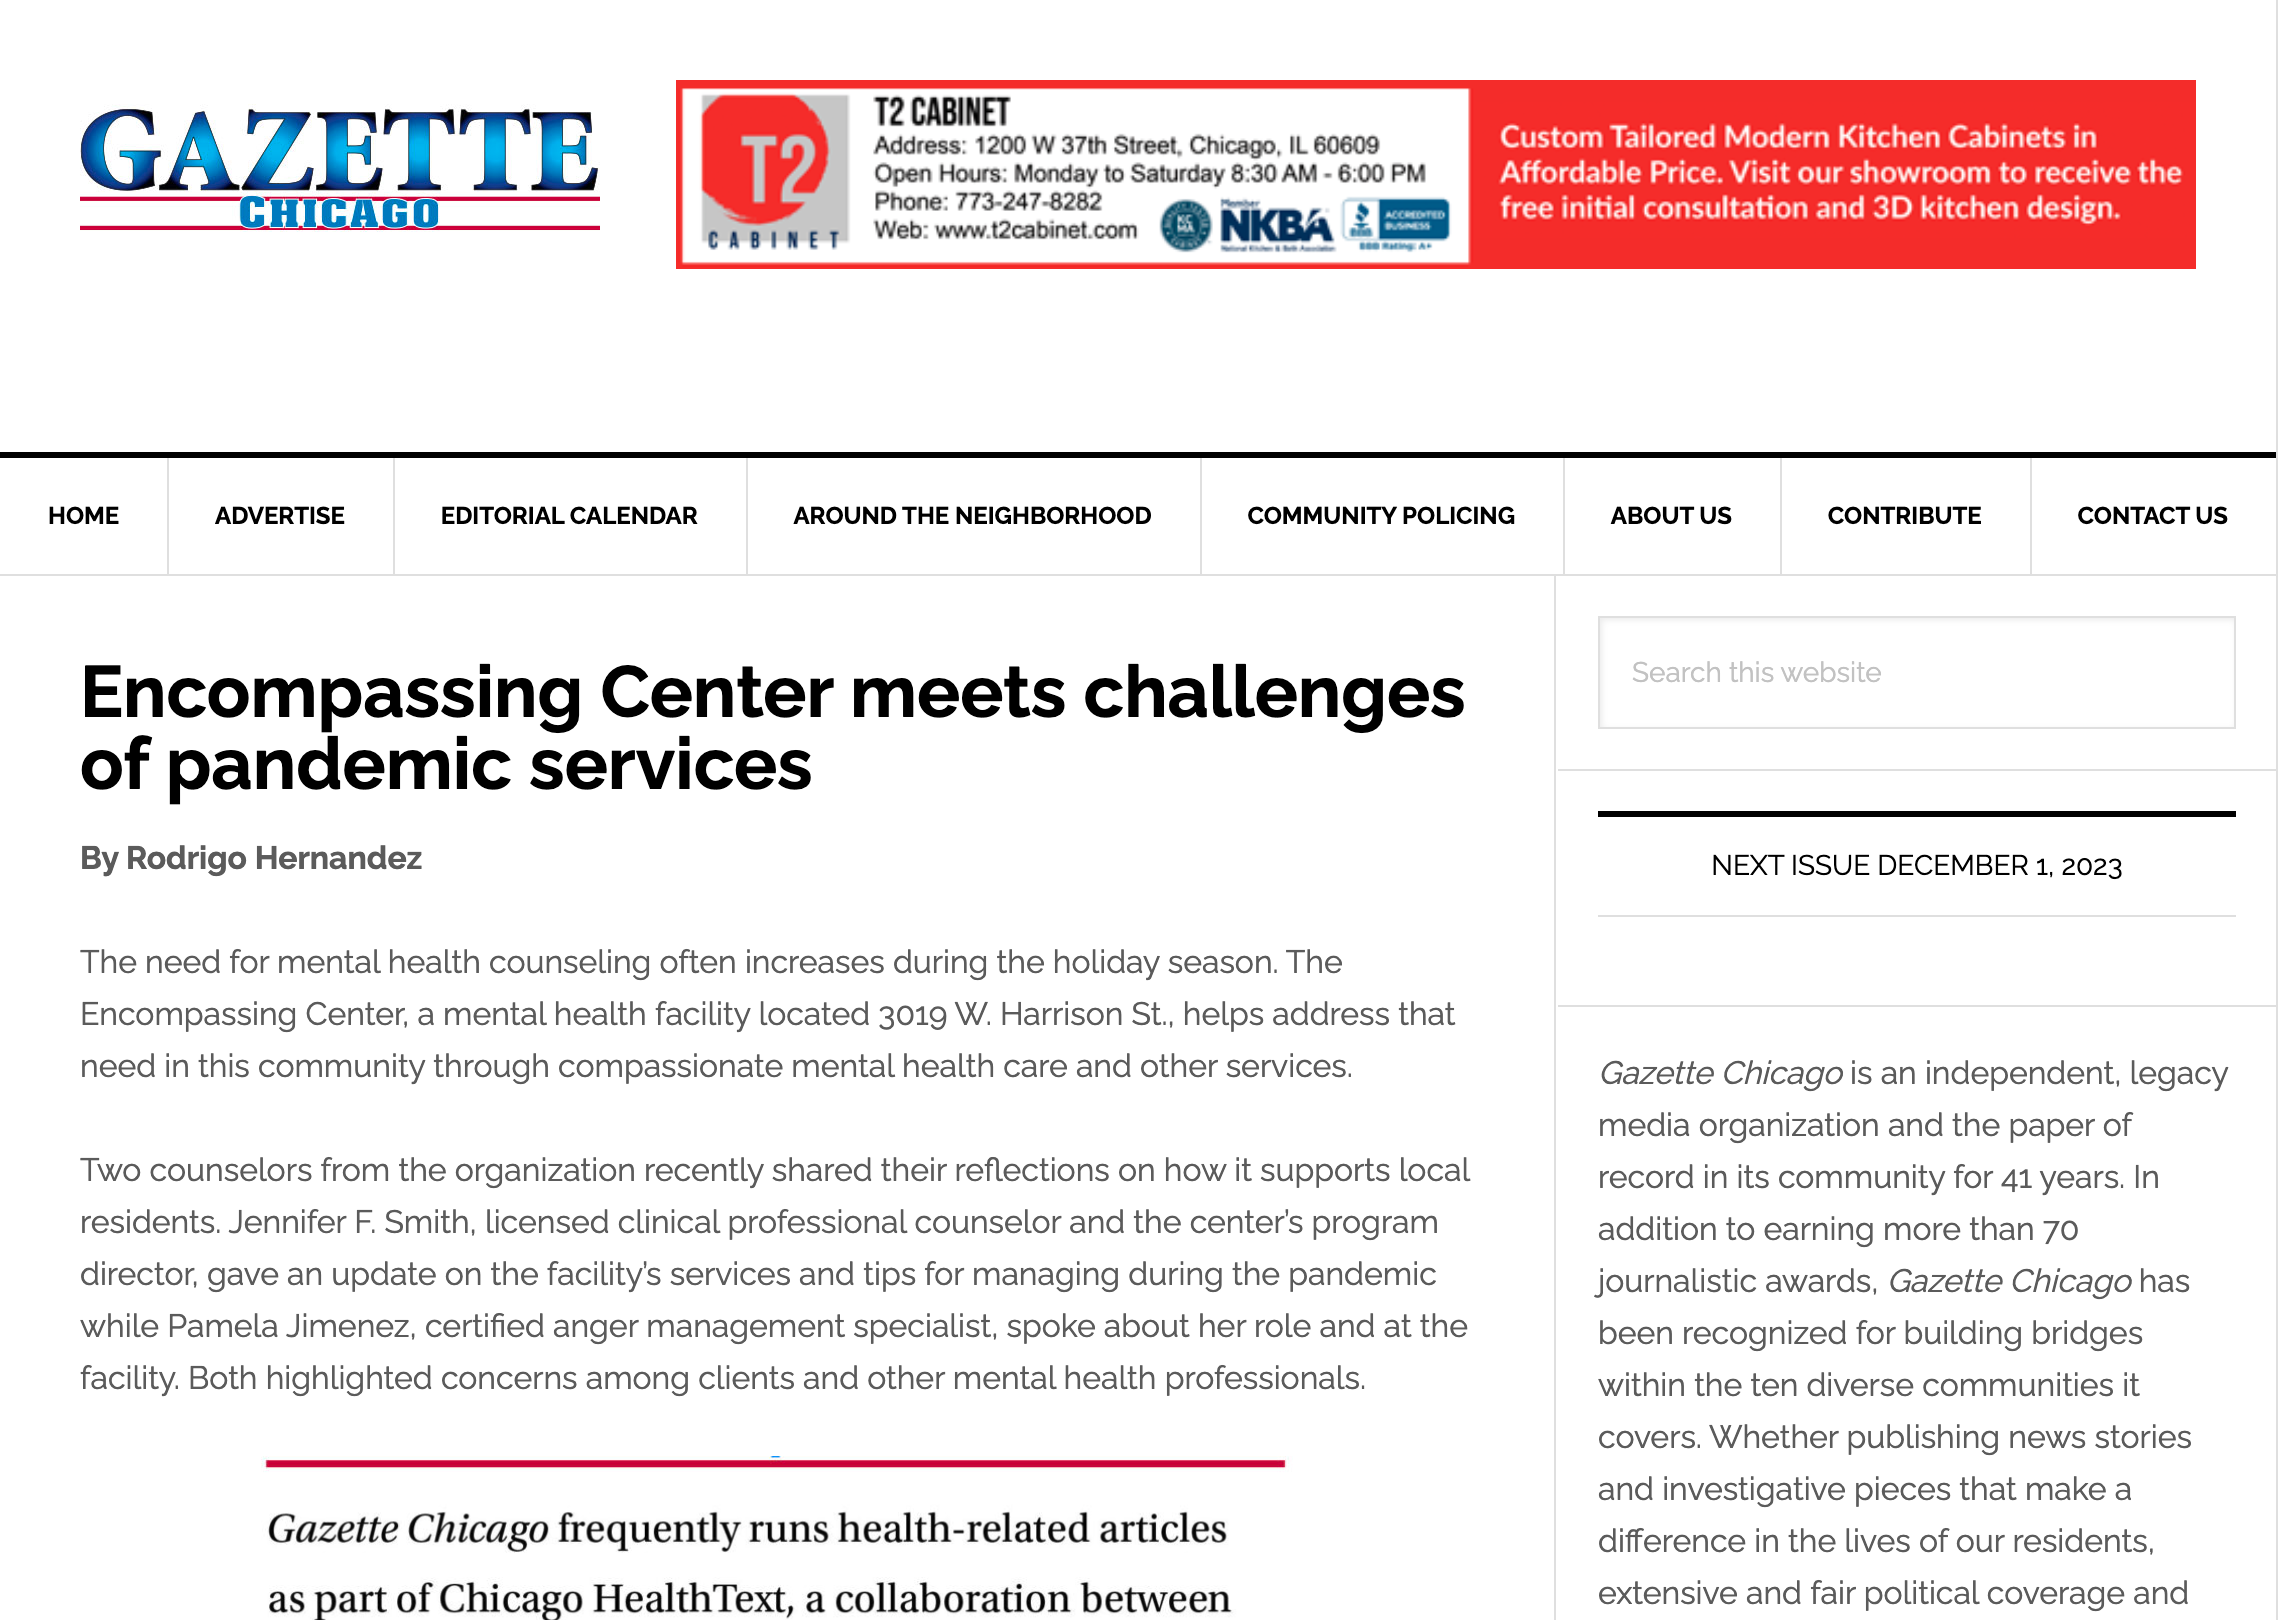 Encompassing Center meets challenges of pandemic services